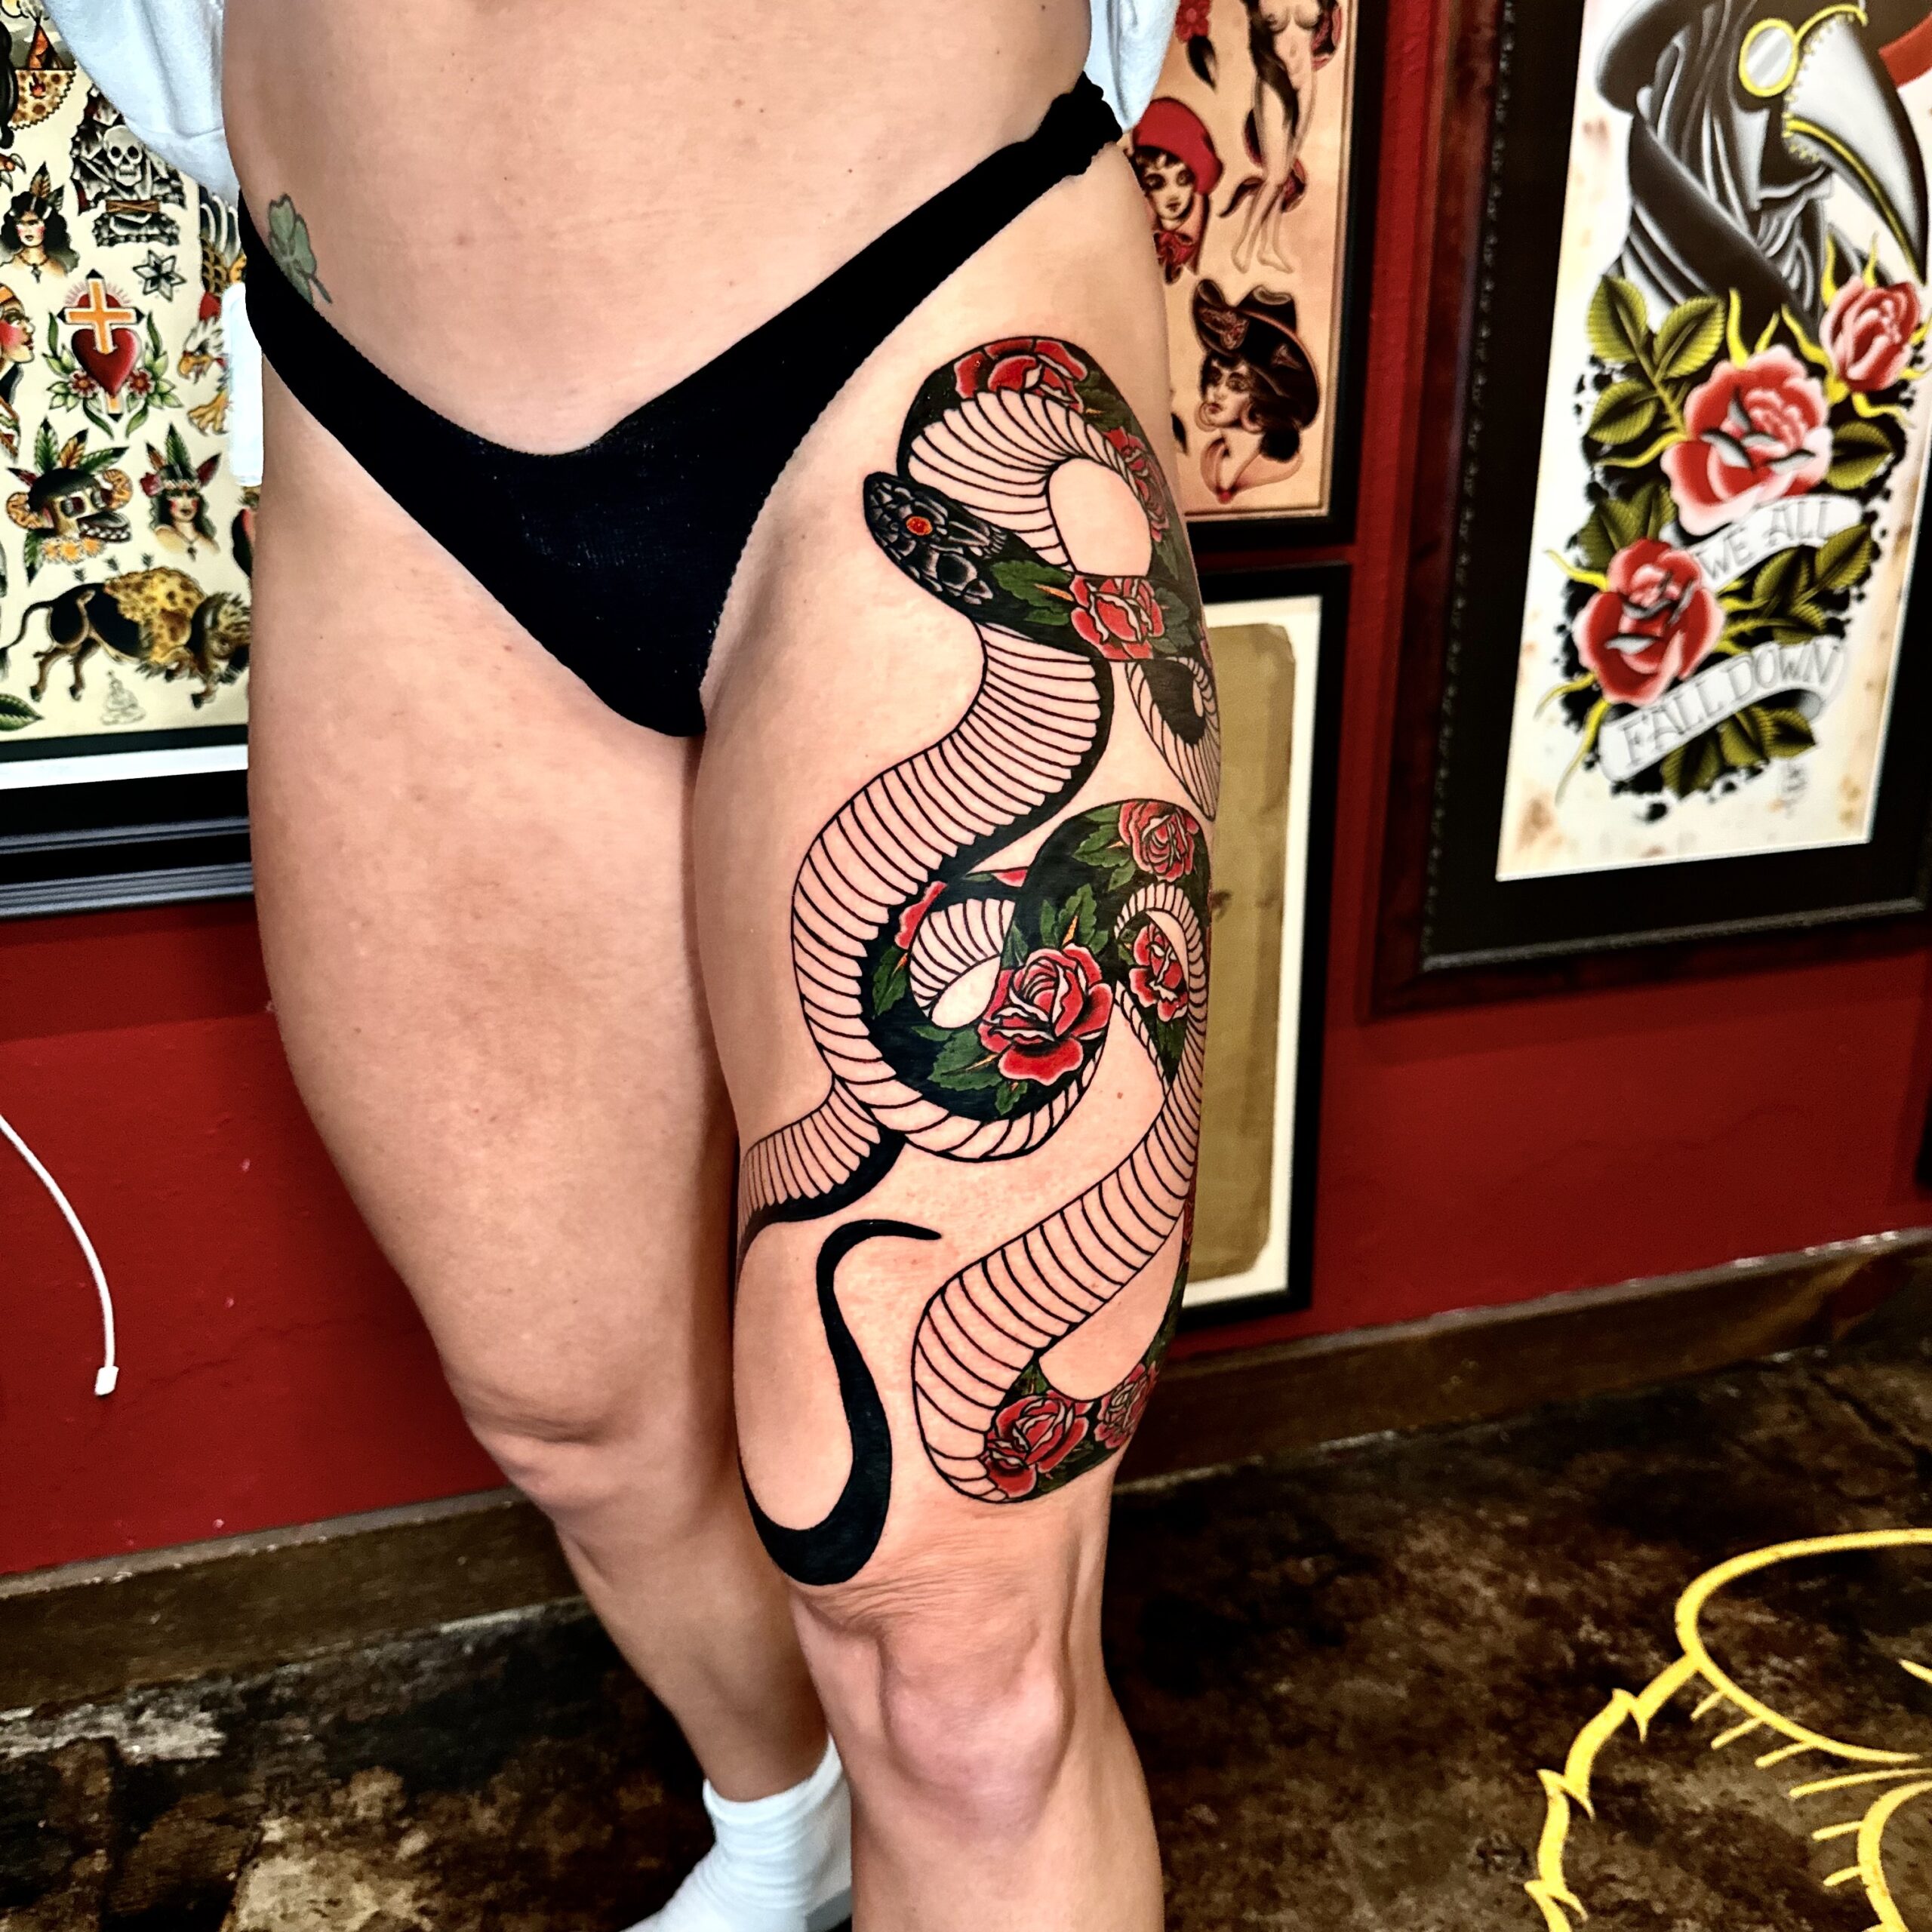 Large tattoo of a snake on a woman’s thigh